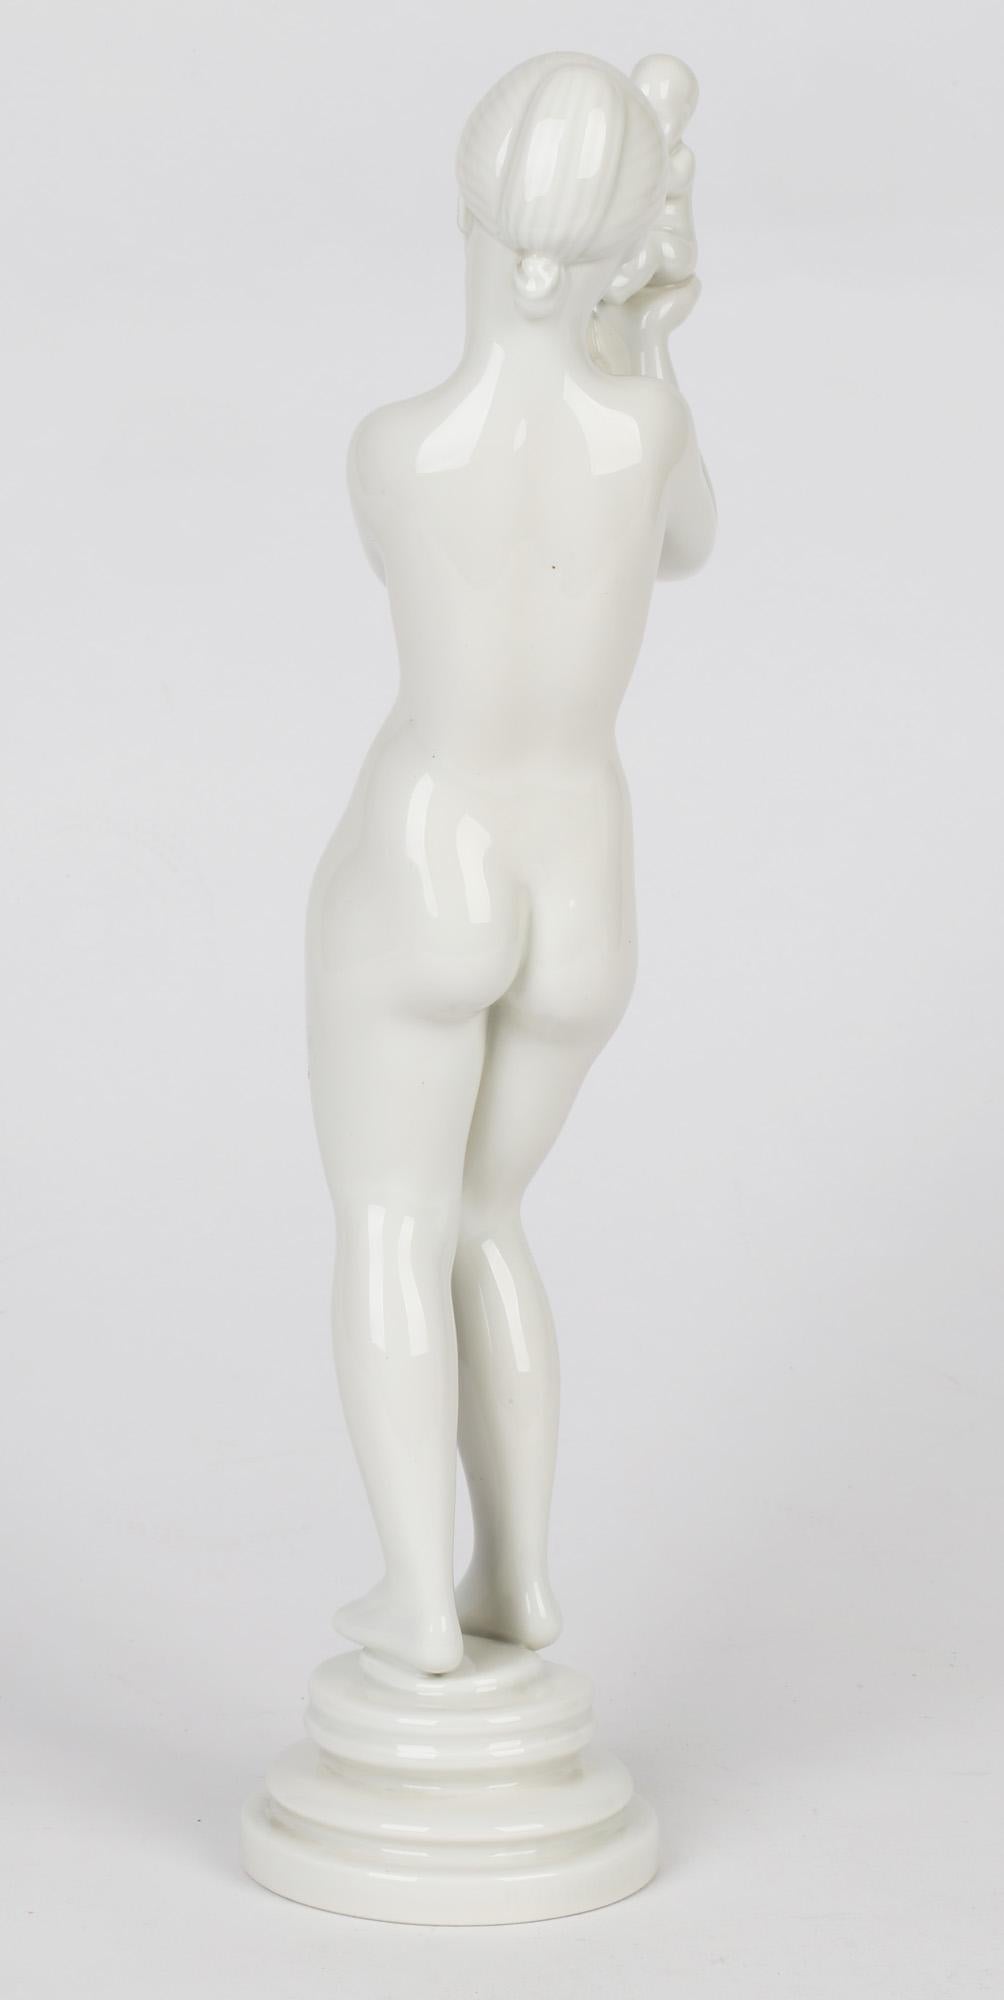 A stylish Danish porcelain Mother & Child sculptural figure designed by Kai Nielsen (1882-1924) for Bing & Grondhal and dating from the early 20th century. The figure portraying a naked girl stands on a rounded pedestal base with a young baby